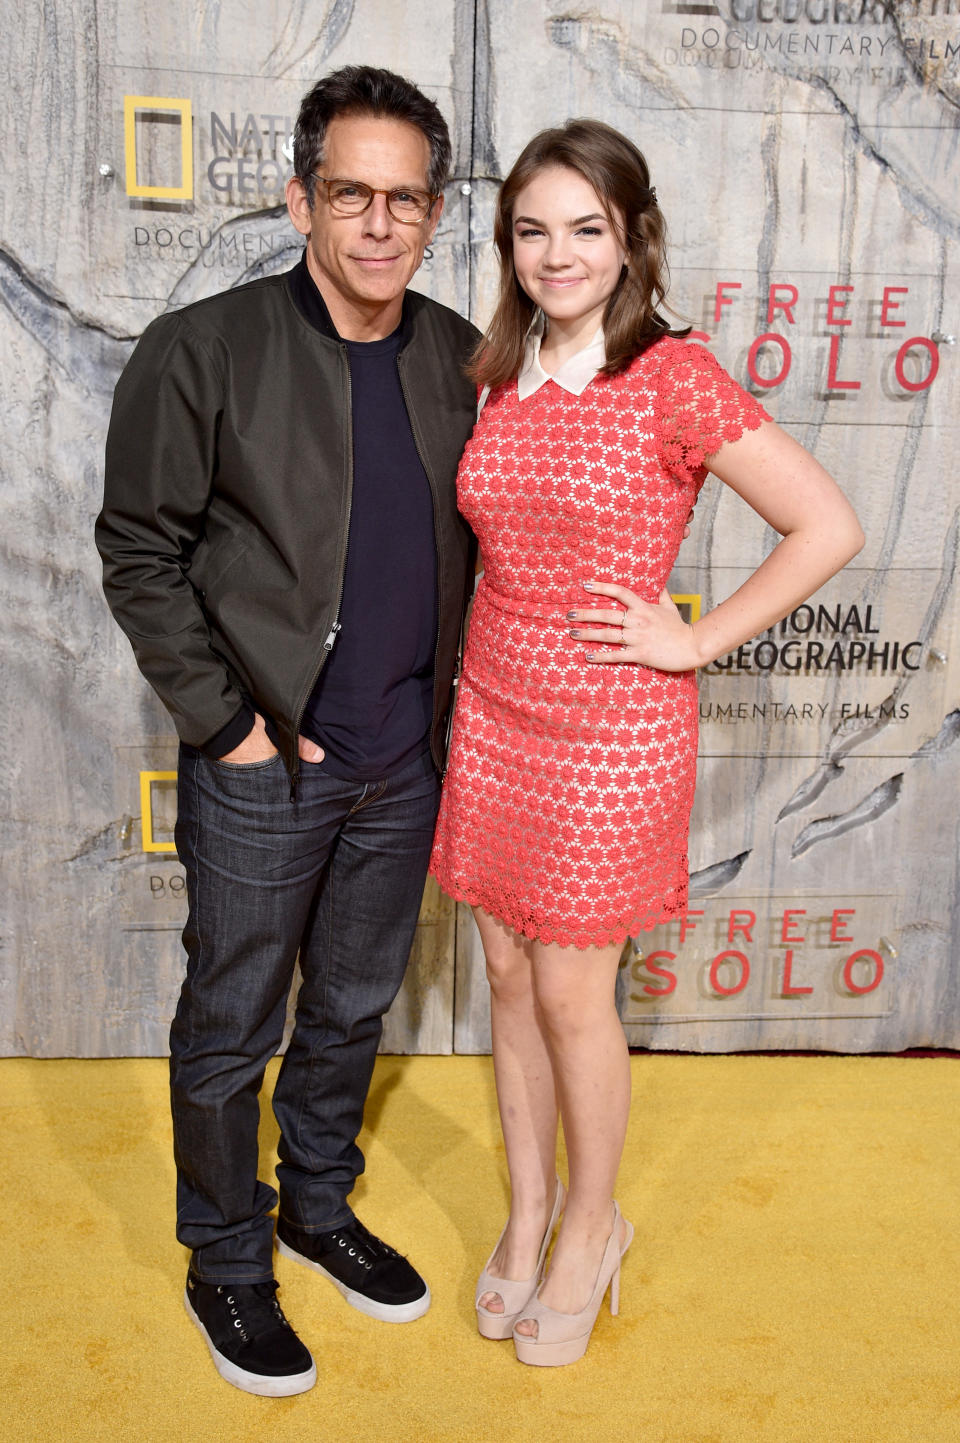 NEW YORK, NY - SEPTEMBER 20: Actor and Comedian Ben Stiller and Ella Olivia Stiller attend the New York City premiere of National Geographic Documentary Films' "Free Solo" at Jazz at Lincoln Center on September 20, 2018 in New York City. Free Solo will be in theaters starting September 28th. (Photo by Bryan Bedder/Getty Images for National Geographic)